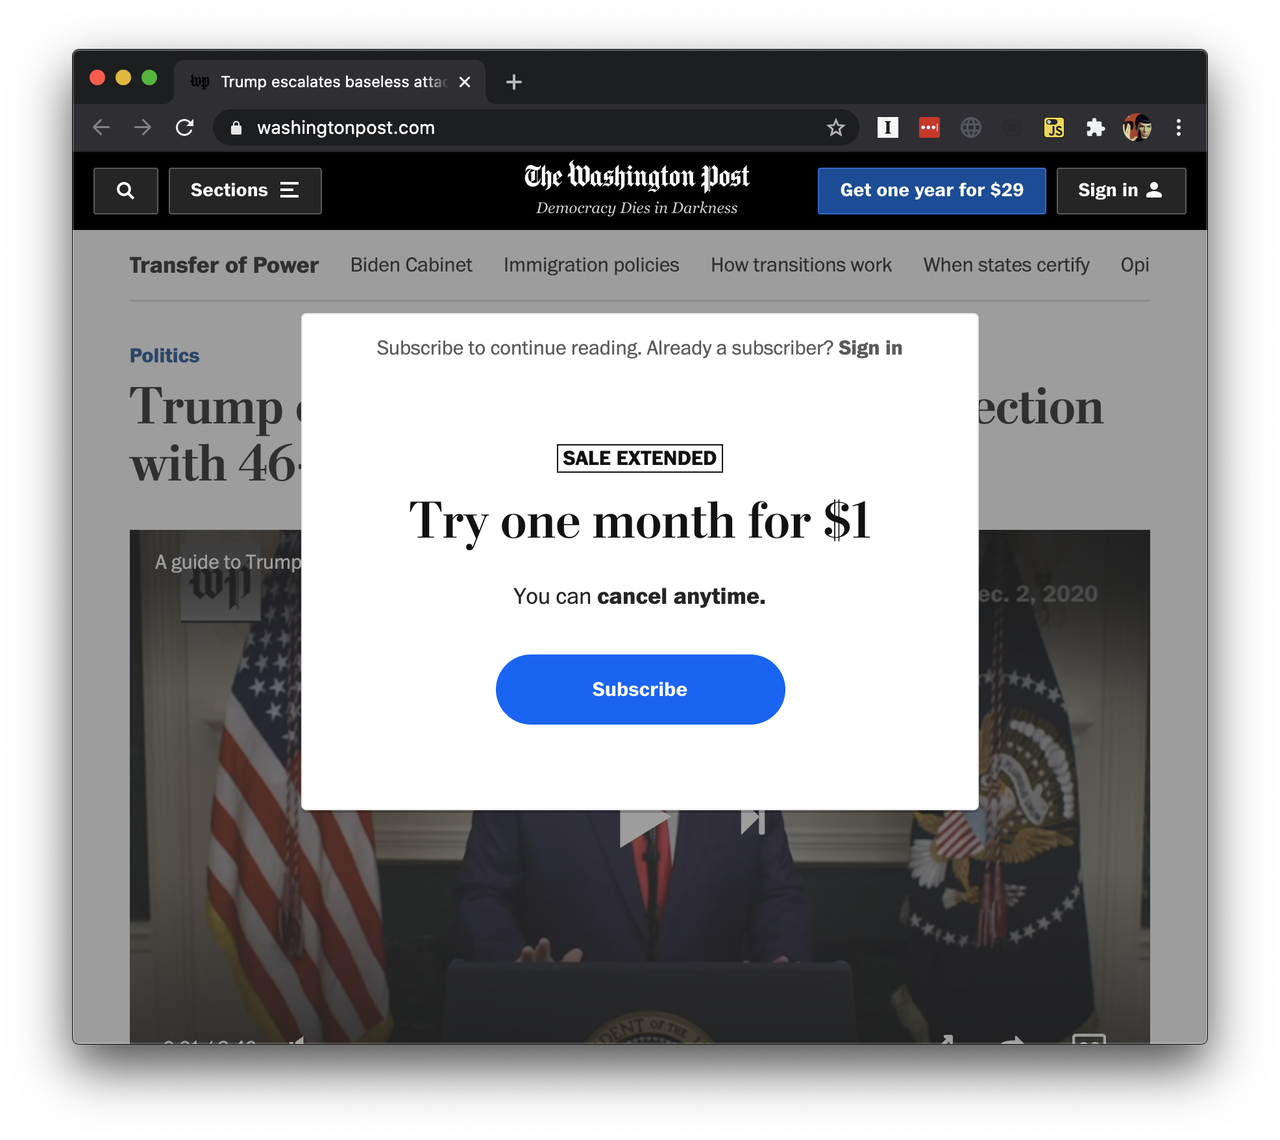 Why can't Bezos fund WaPo in perpetuity?